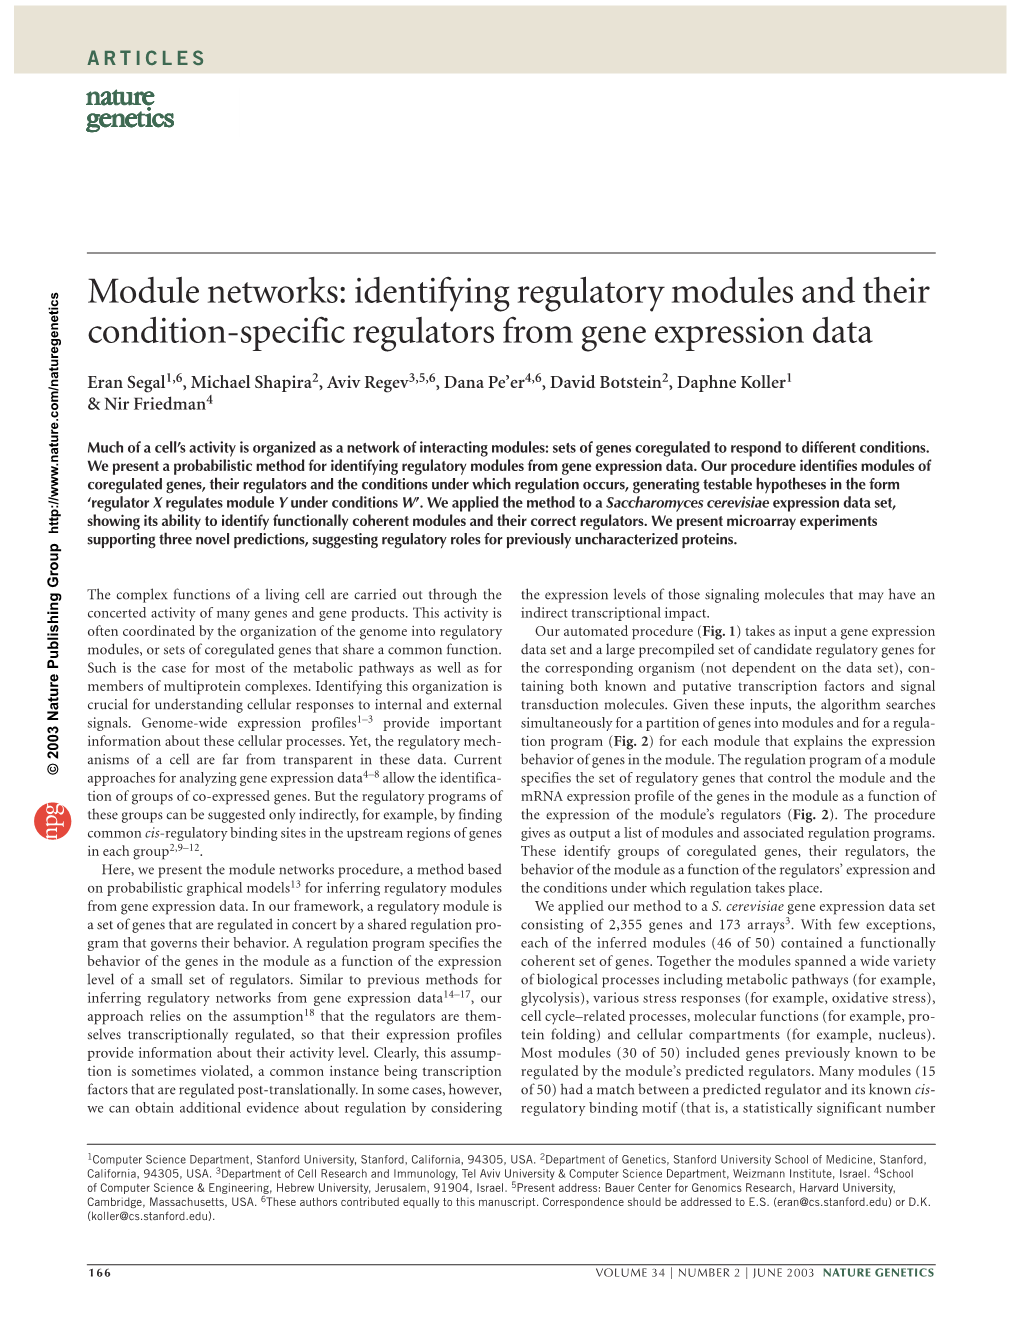 Identifying Regulatory Modules and Their Condition-Specific Regulators from Gene Expression Data